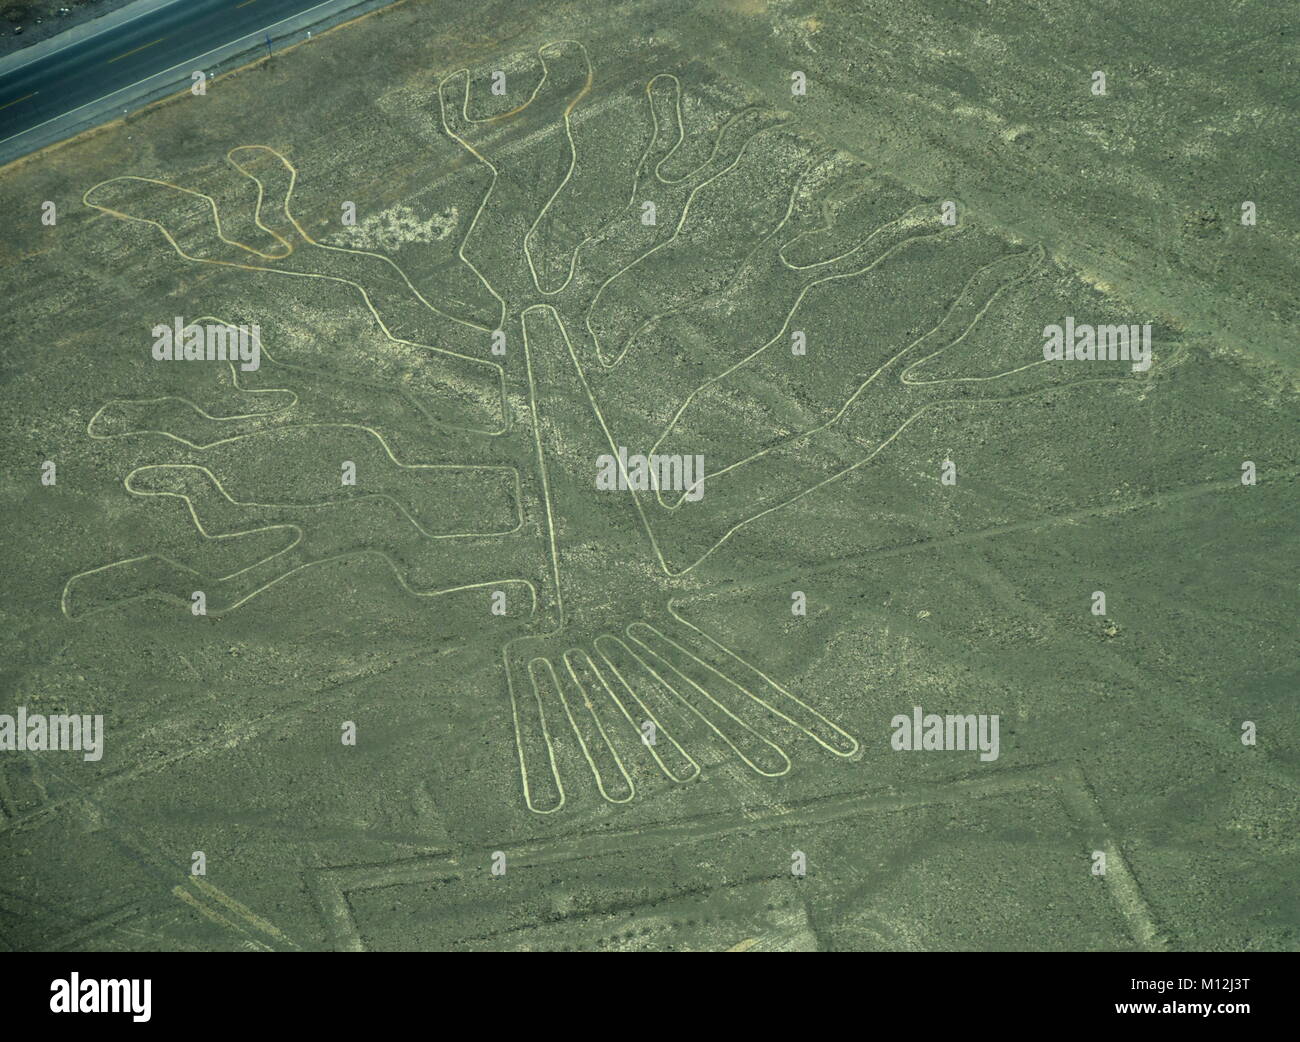 The Nazca Lines in Peru, here you can see the Tree Stock Photo